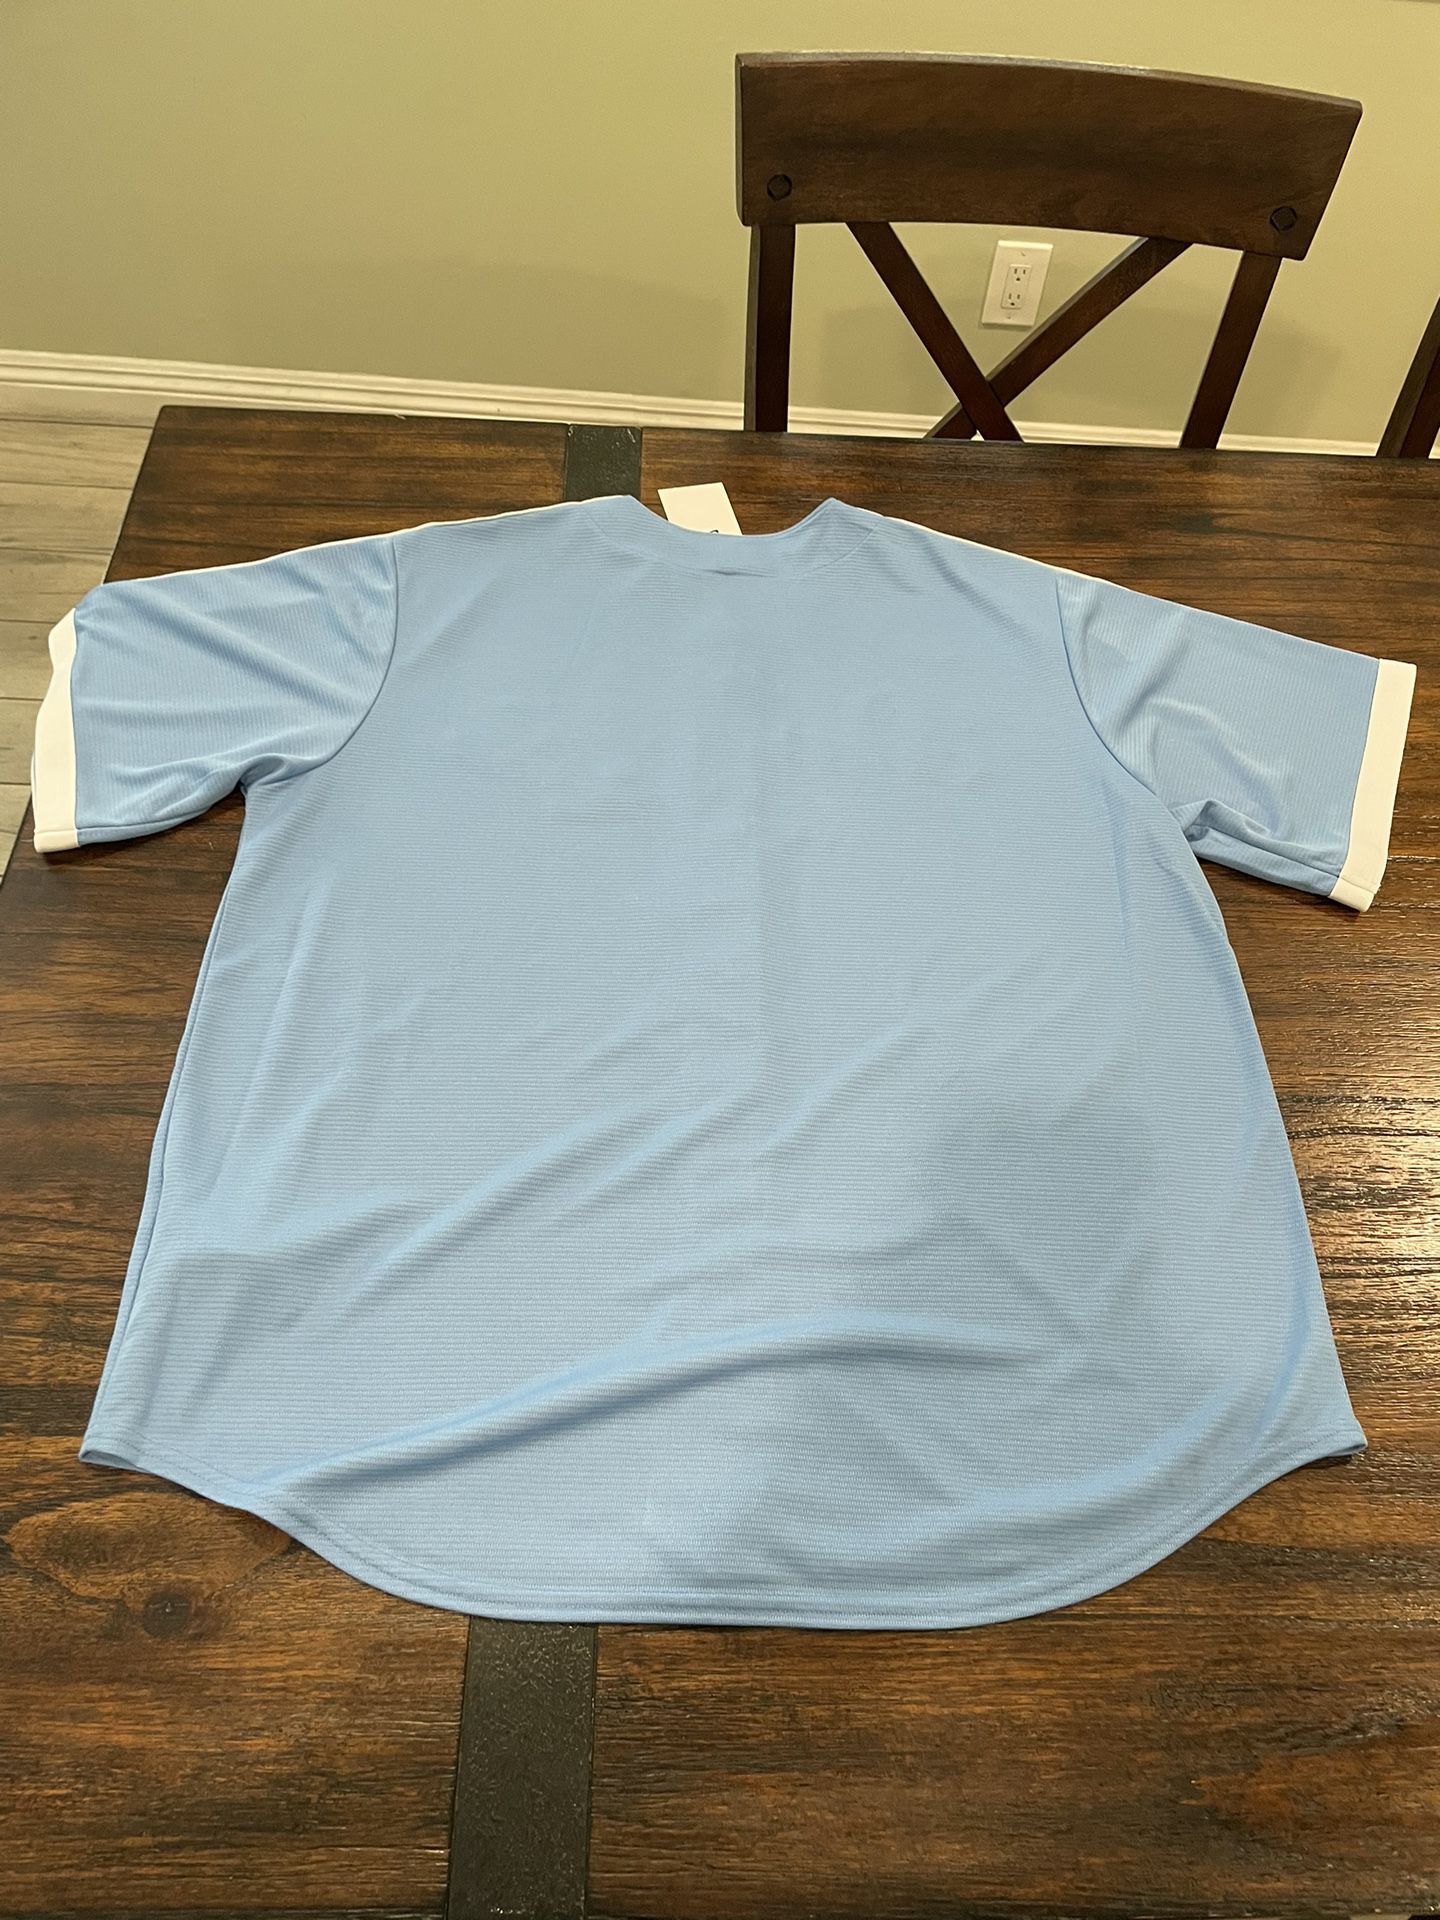 Nike Twins Baseball Jersey New No Tags Size Large Men for Sale in Los  Angeles, CA - OfferUp